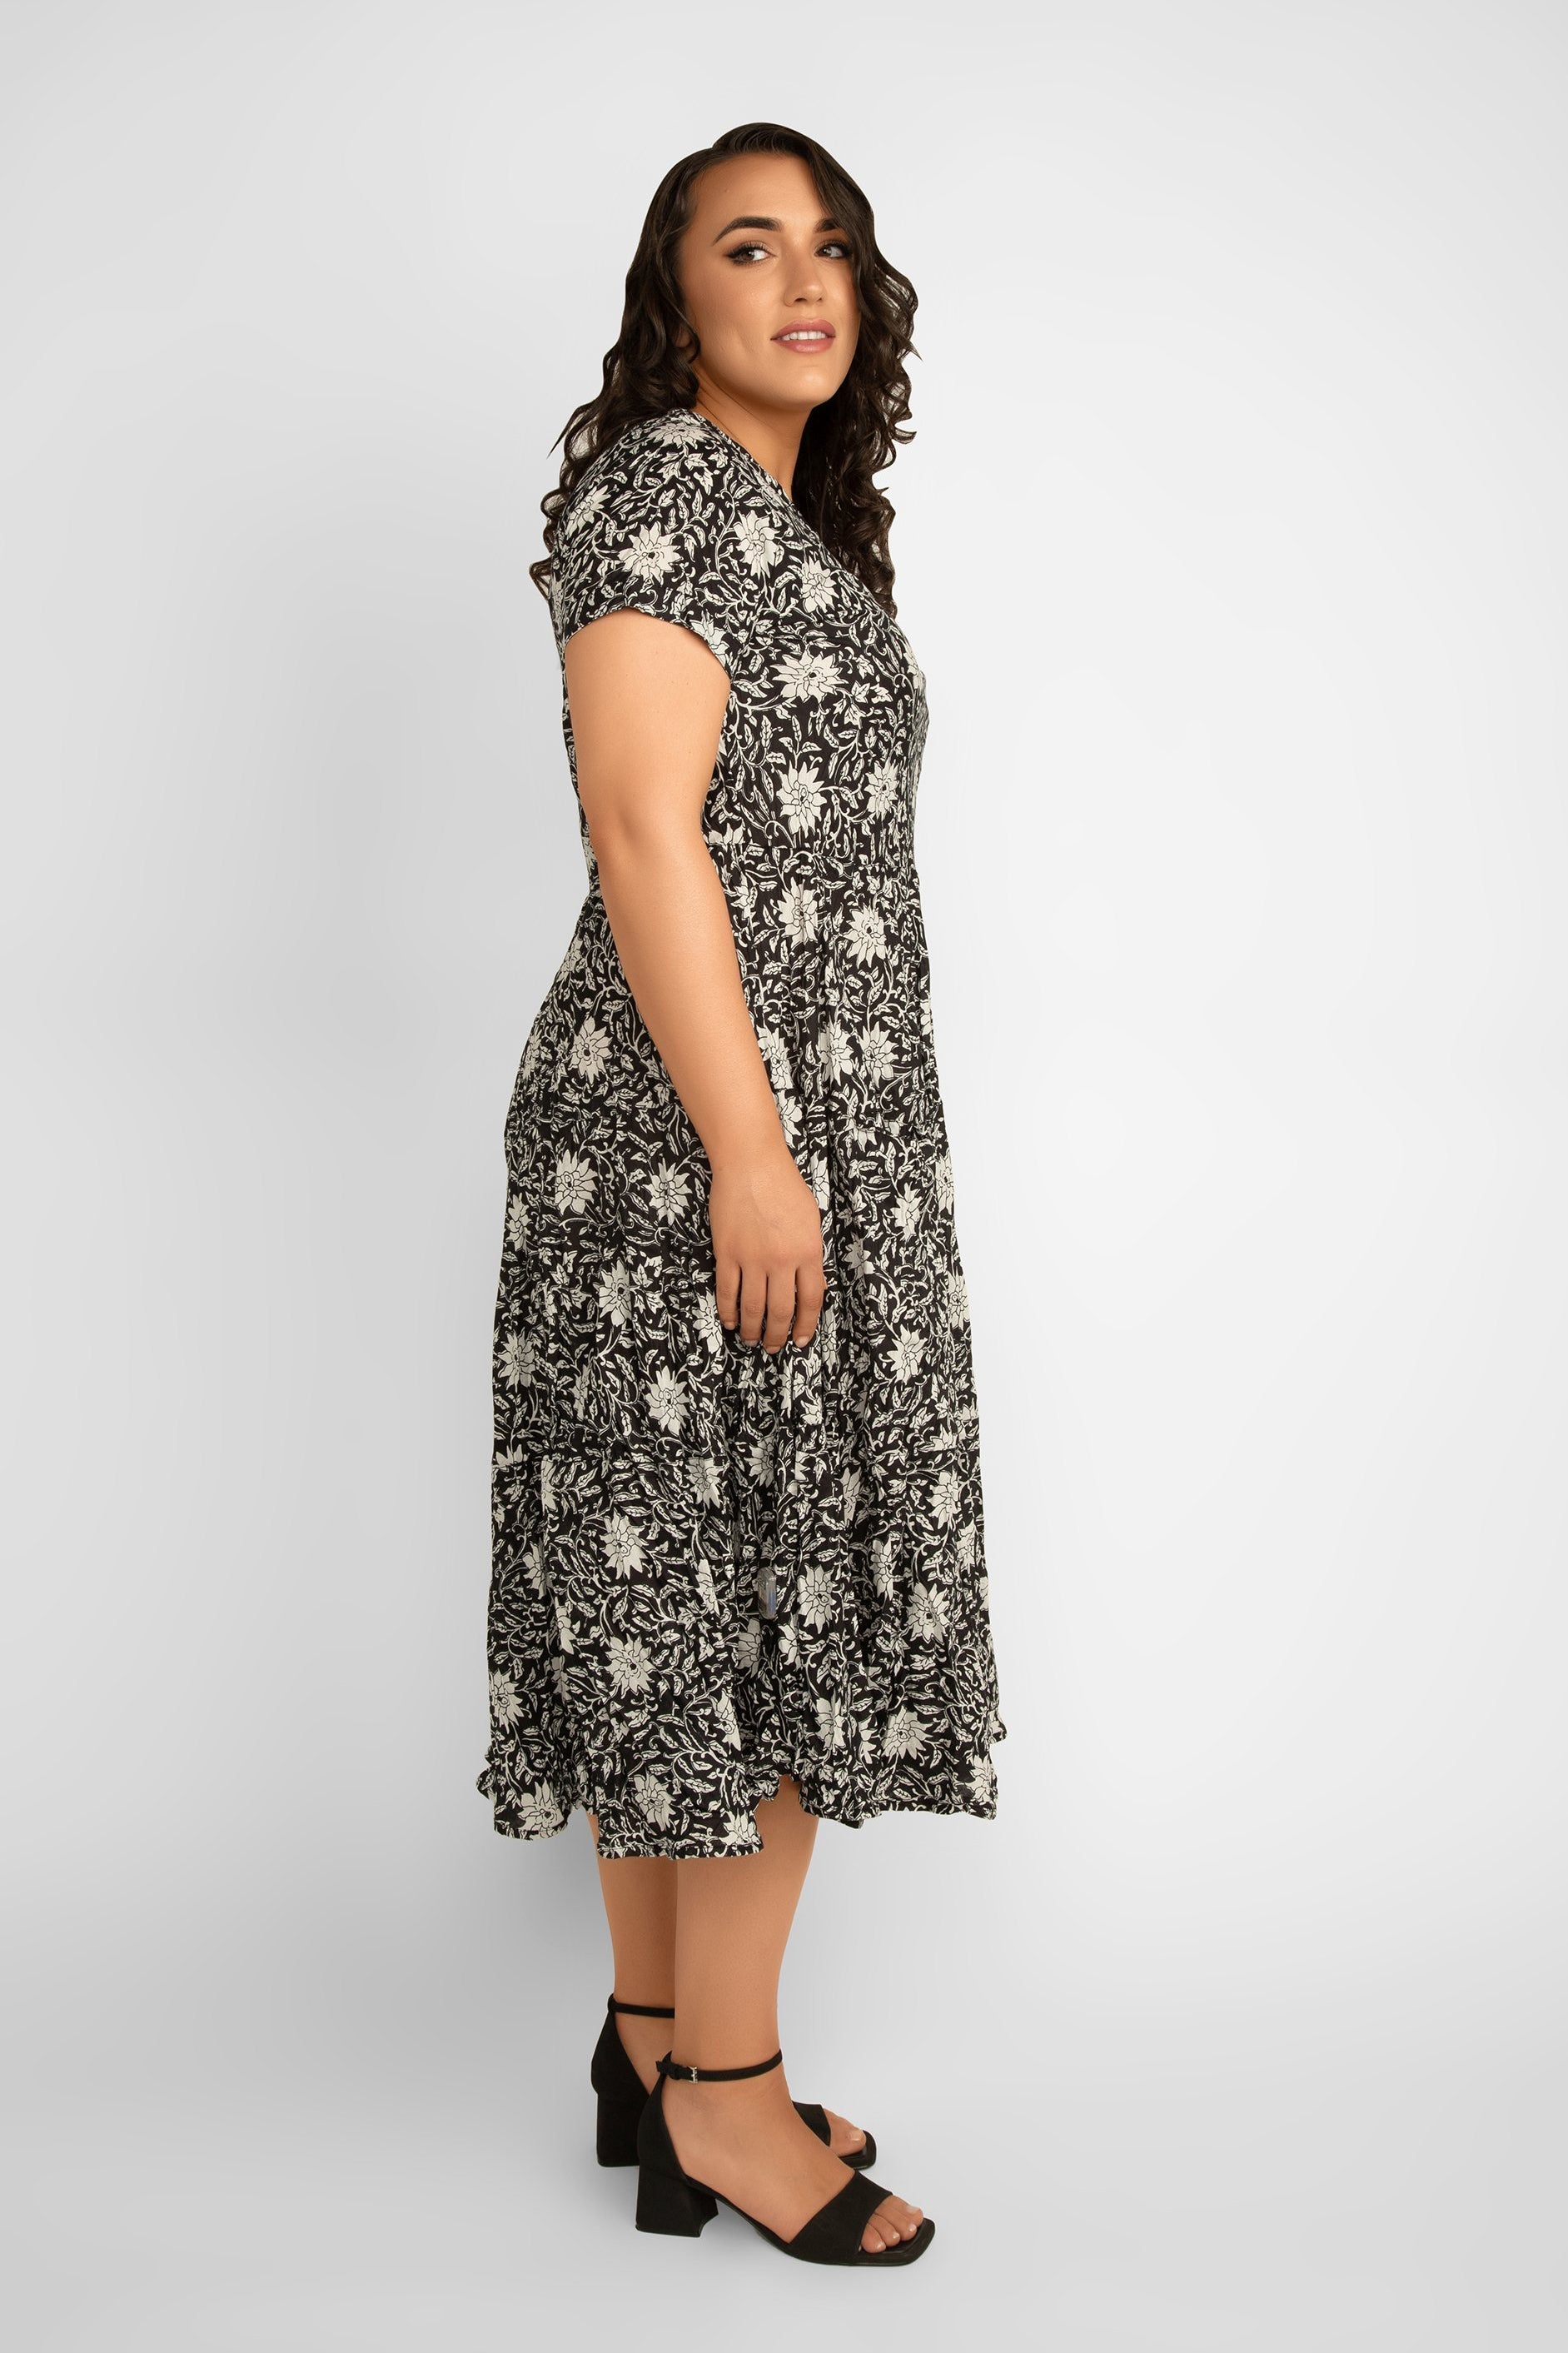 Dress Addict Jazi Short Sleeve V-Neck Tiered Midi Dress with Pockets in Black & White floral print